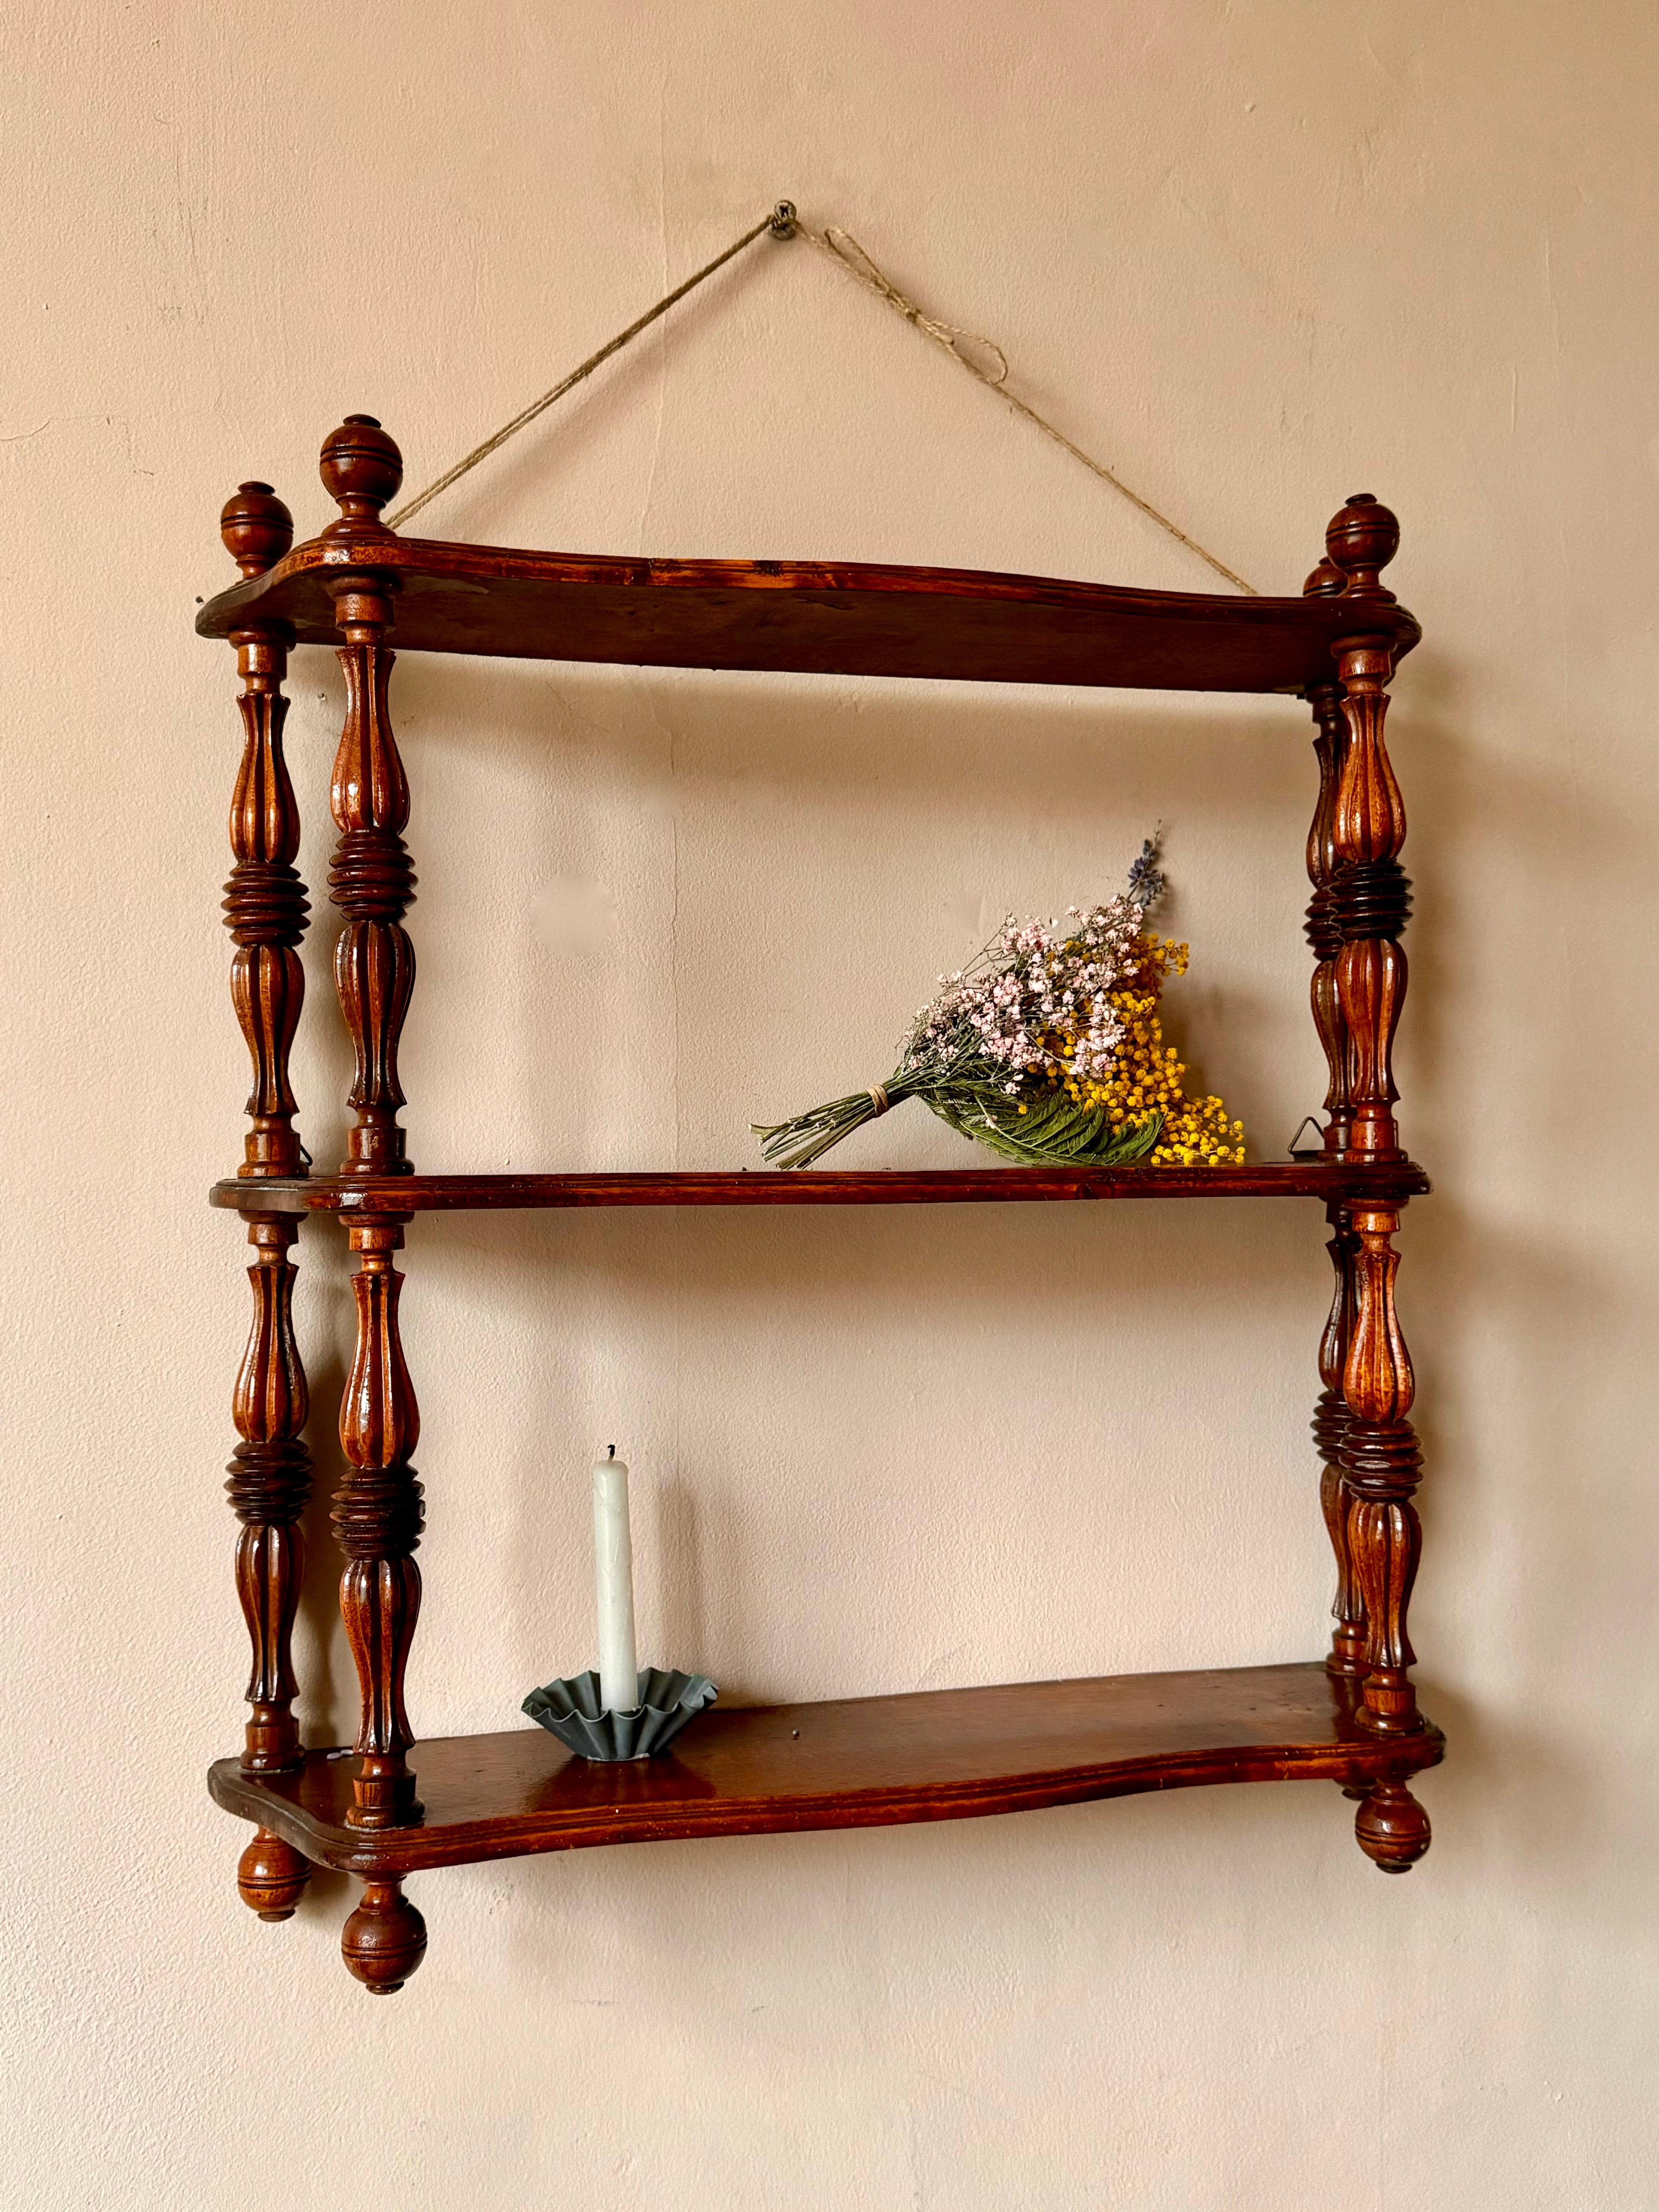 Early C20th French pine wall shelf.

Beautiful, petite pine shelf with turned uprights and finials. In excellent condition with very light wear. The shelf has been revarnished at some stage.